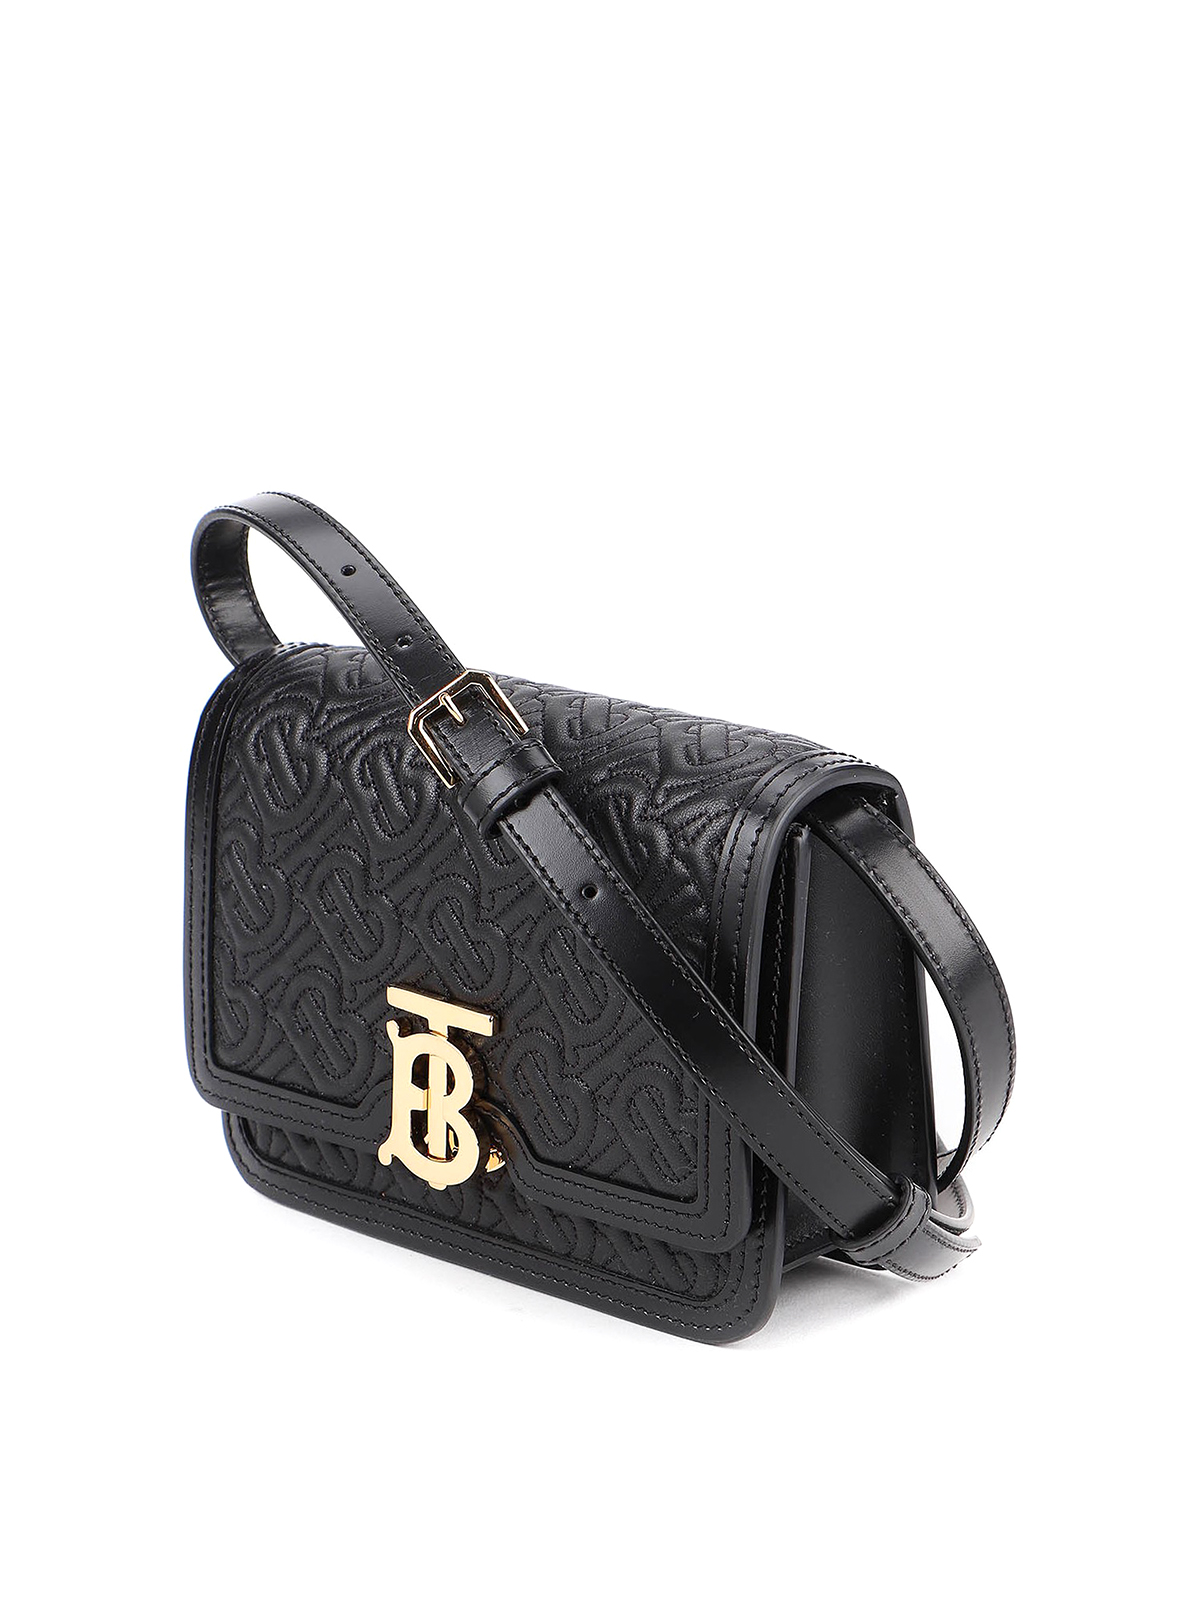 body bags Burberry - TB quilted leather bag - 8032707